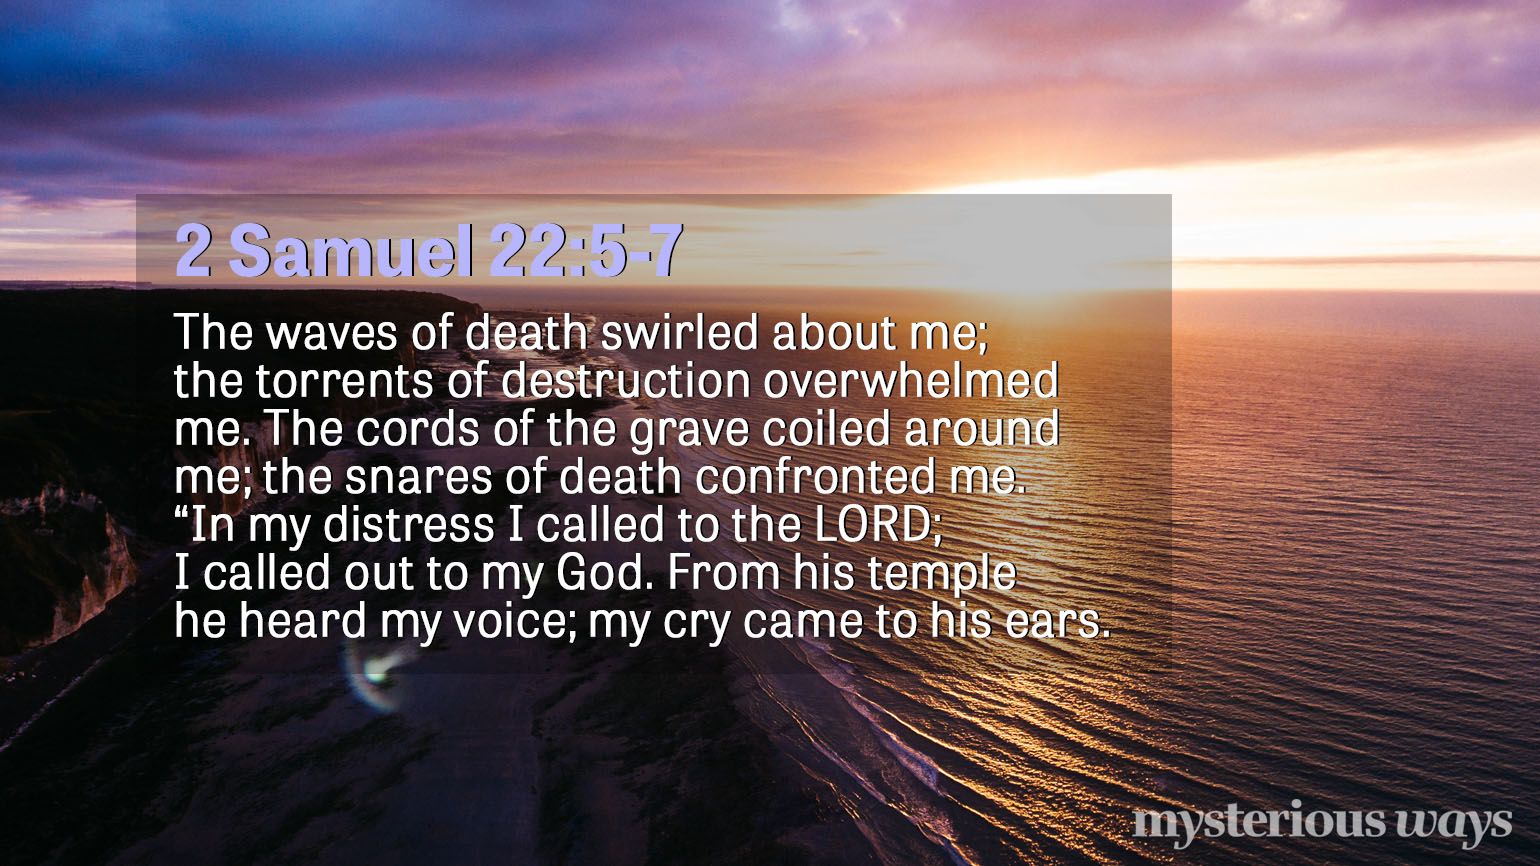 2 Samuel 22:5-7 The waves of death swirled about me; the torrents of destruction overwhelmed me. The cords of the grave coiled around me; the snares of death confronted me. “In my distress I called to the LORD; I called out to my God. From his temple he heard my voice; my cry came to his ears.